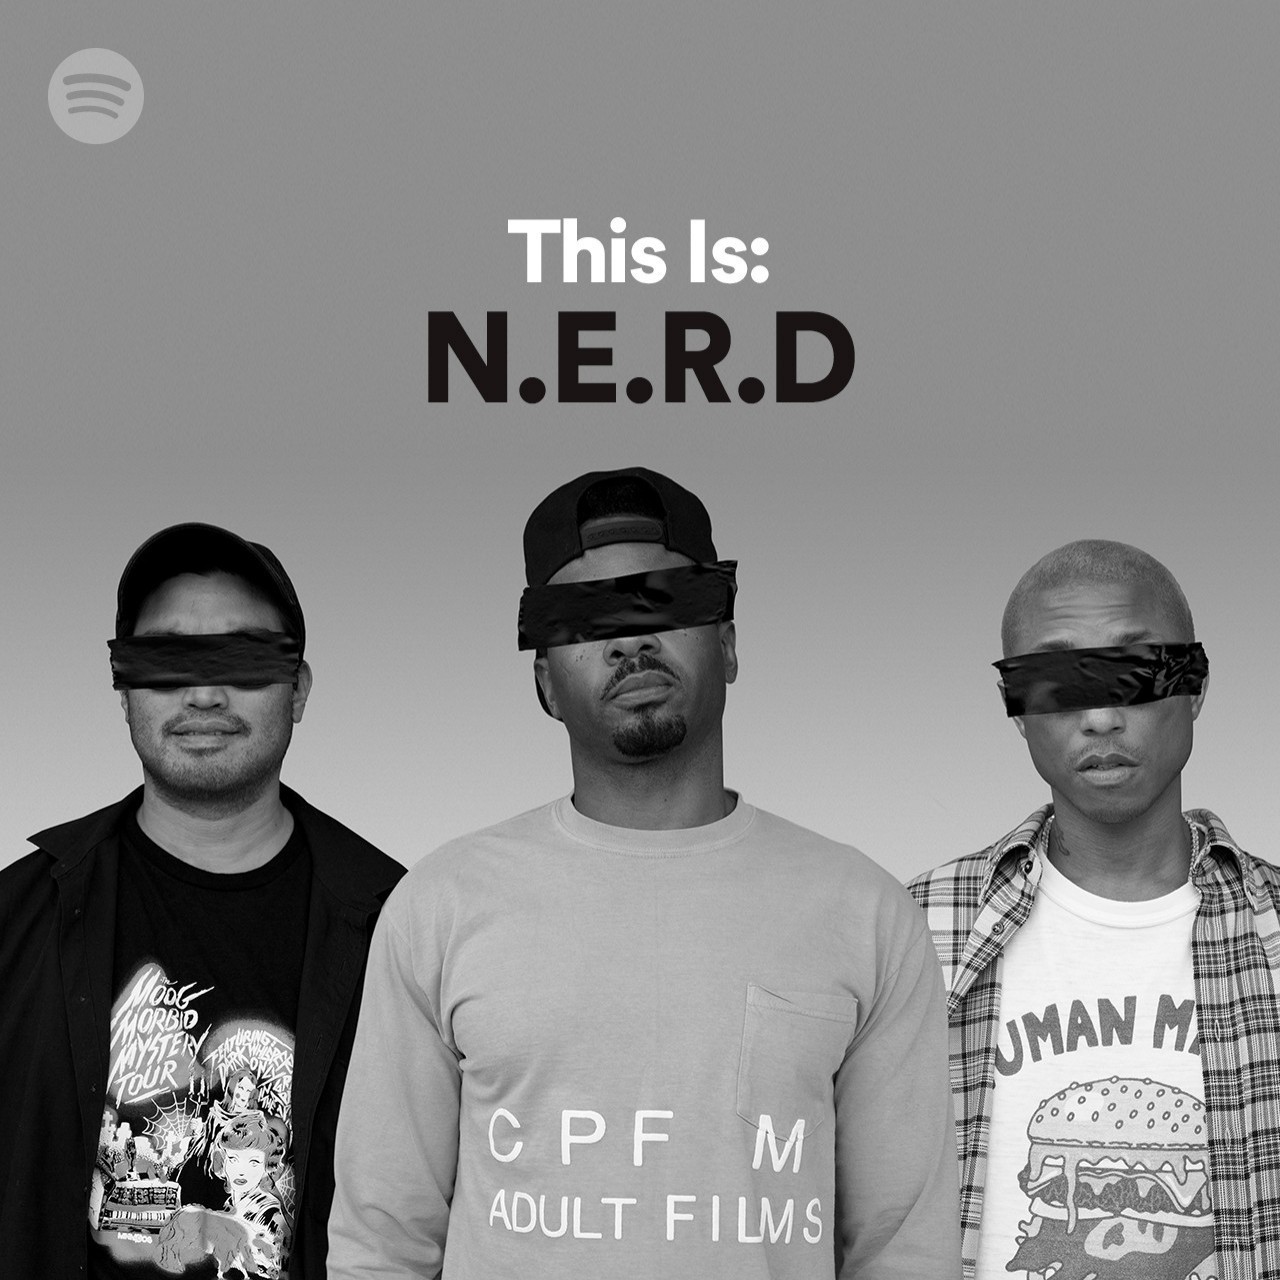 This Is N.E.R.D by spotify Spotify Playlist